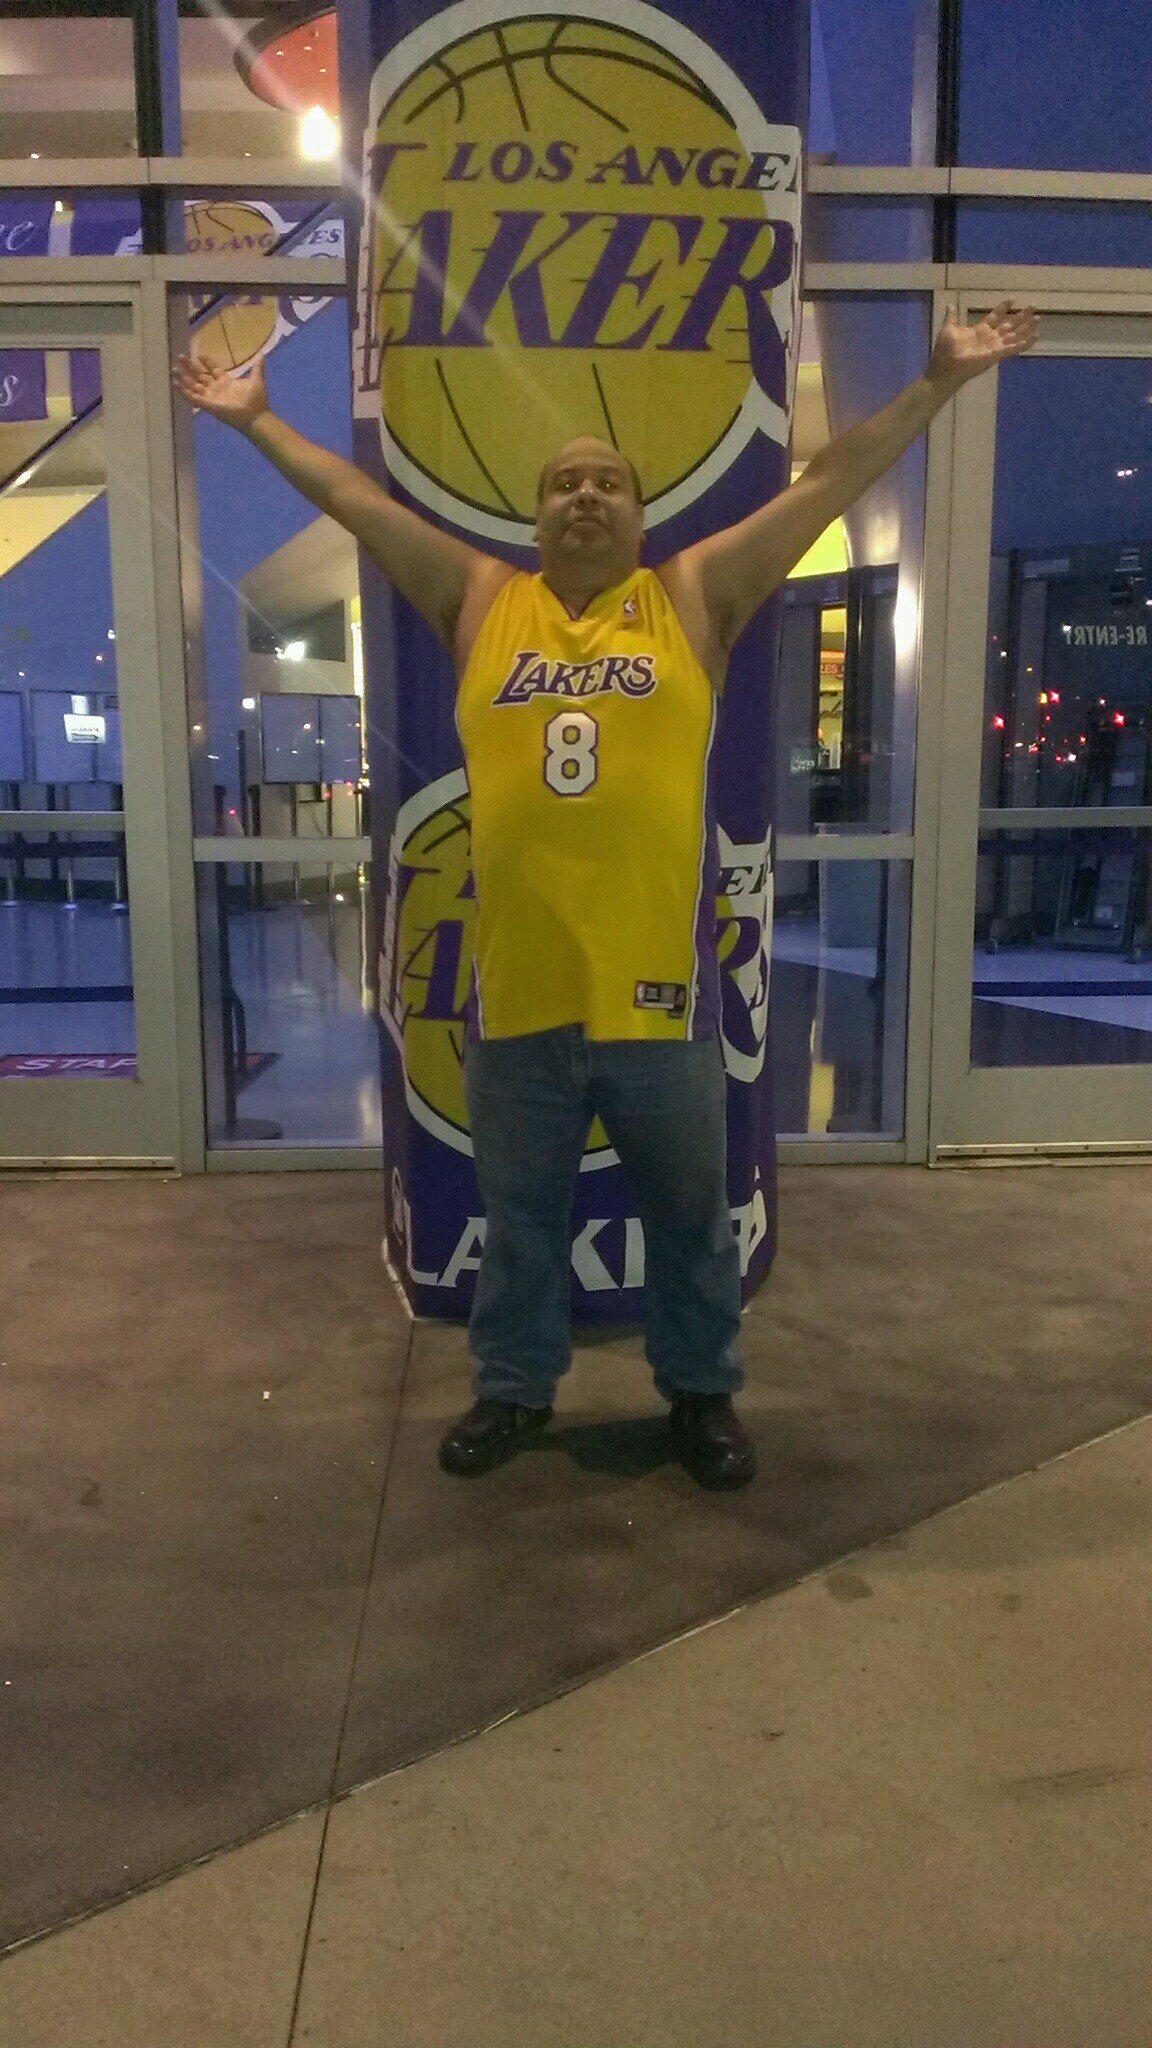 We ride together, we die together. Lakers fans for life!